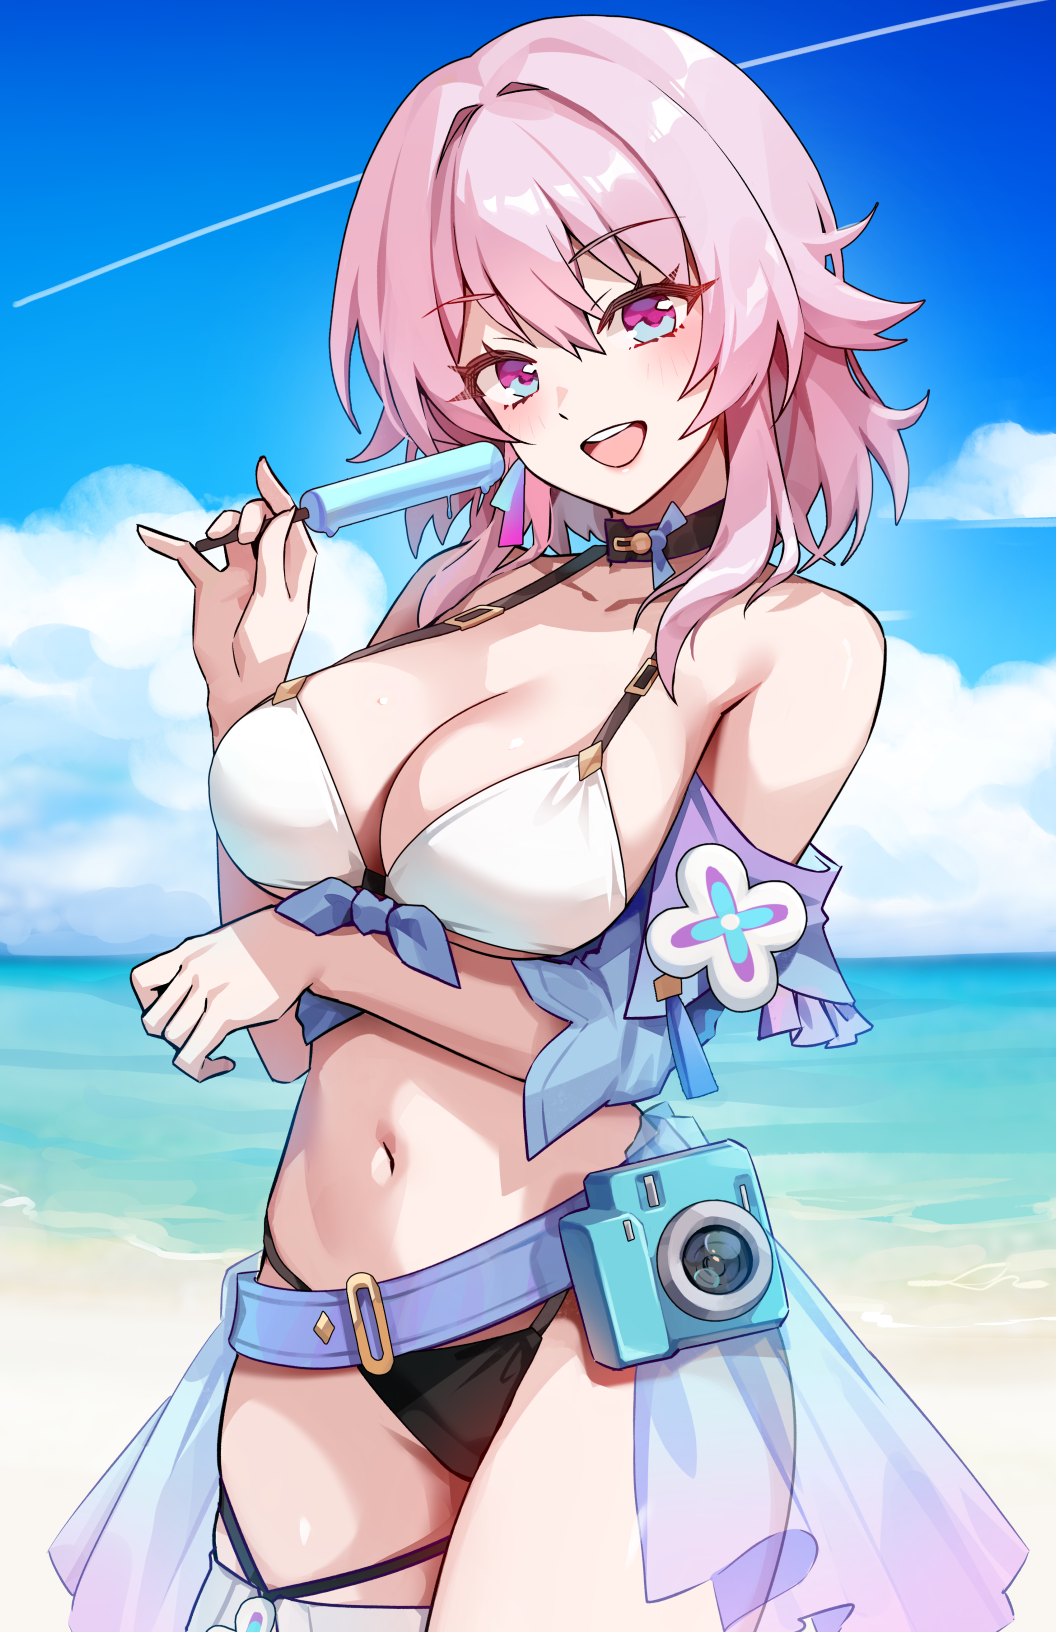 REI-B-83 March 7th Beach Popsicle - Reine - Store Image